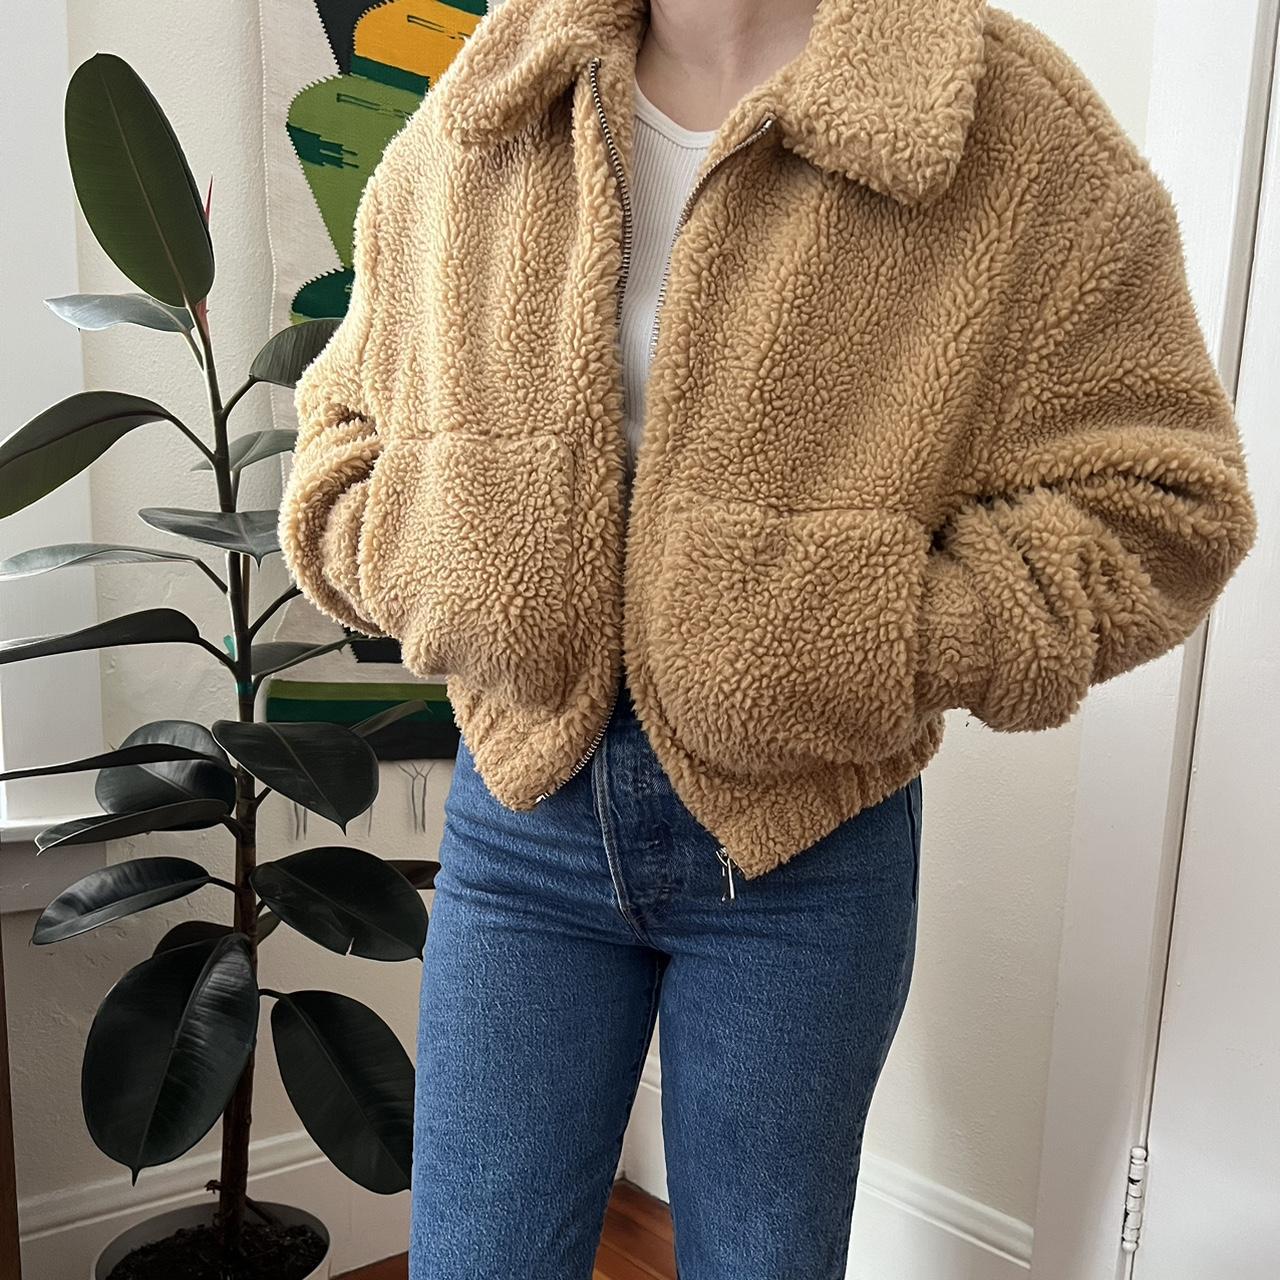 Urban Outfitters Women's Tan and Cream Jacket | Depop